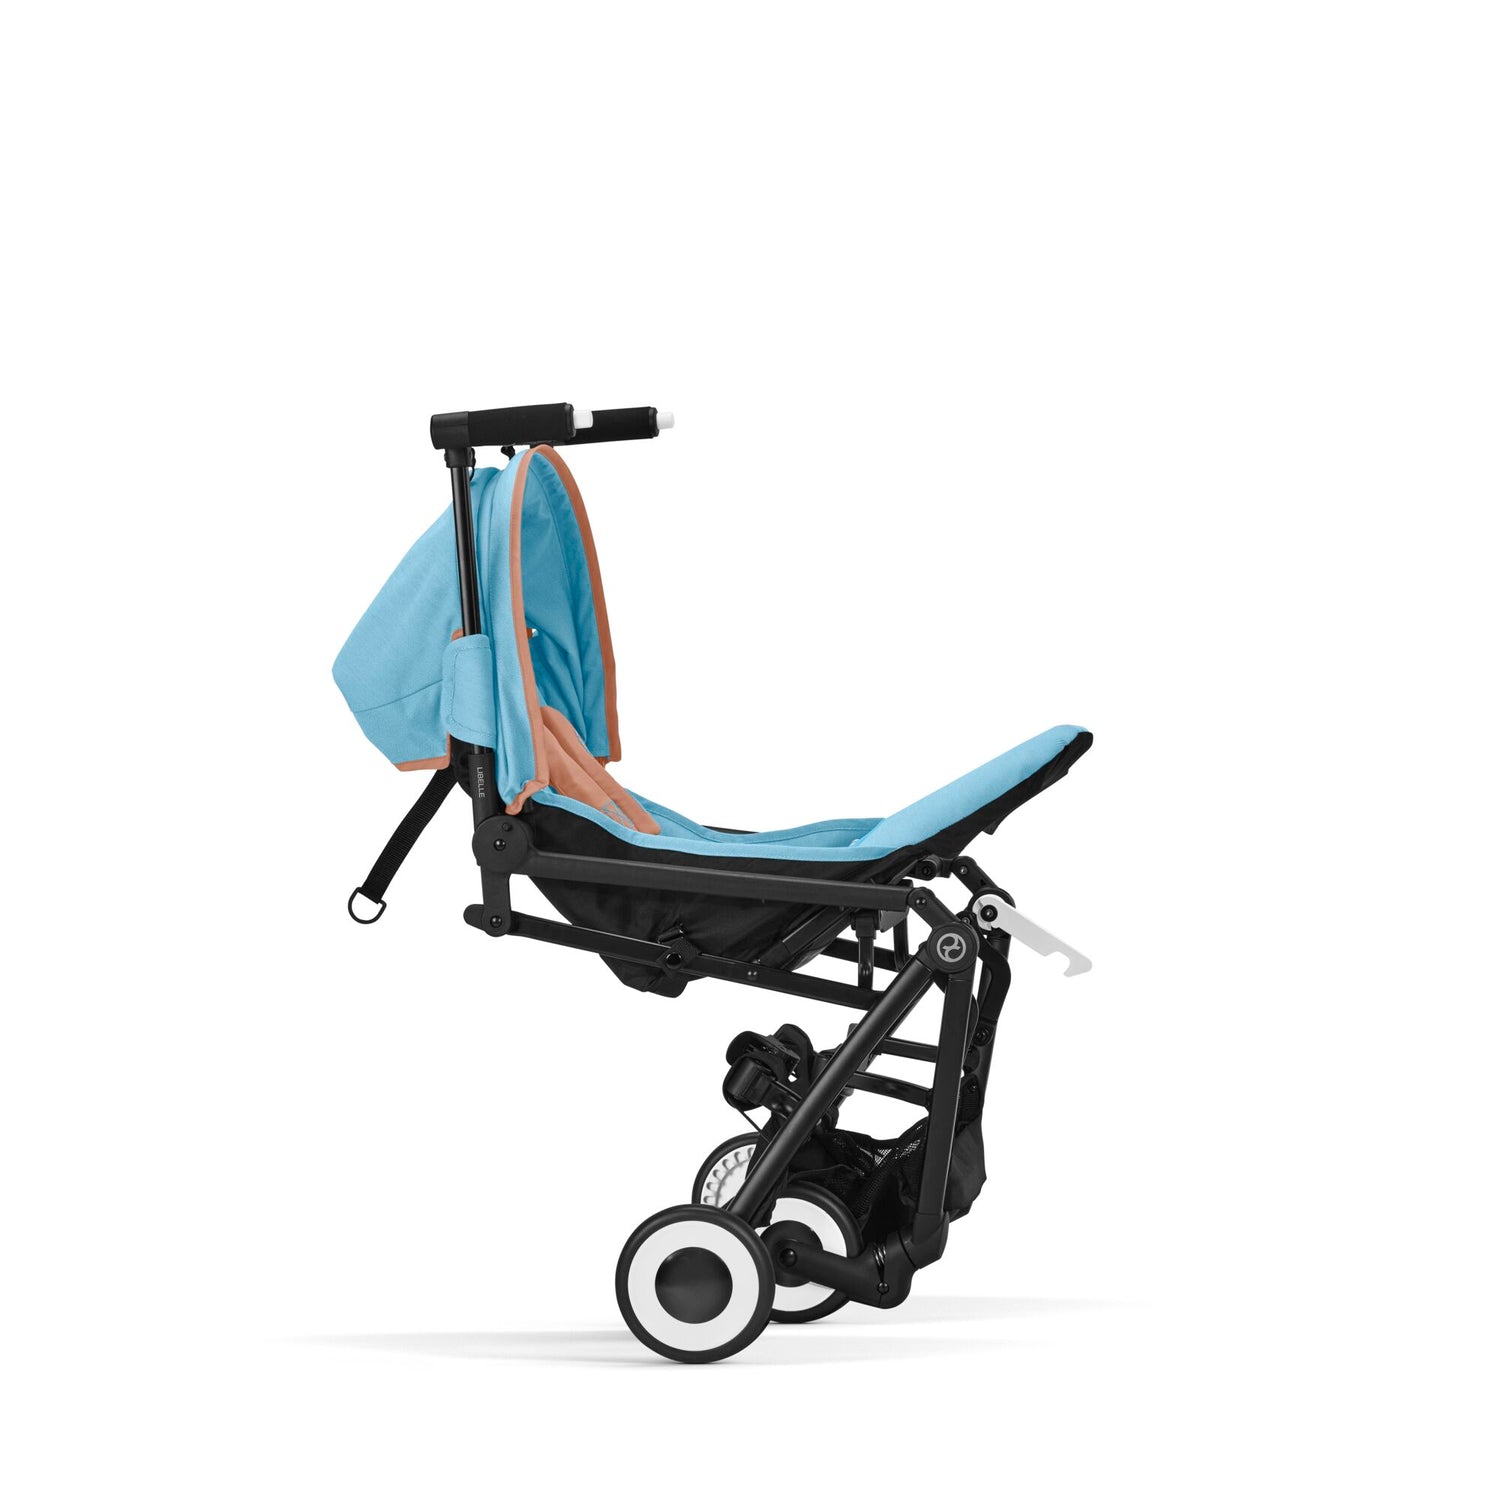 Buggy LIBELLE Cybex Gold bei www.harmony-ambiente.at | Buggy Libelle falten